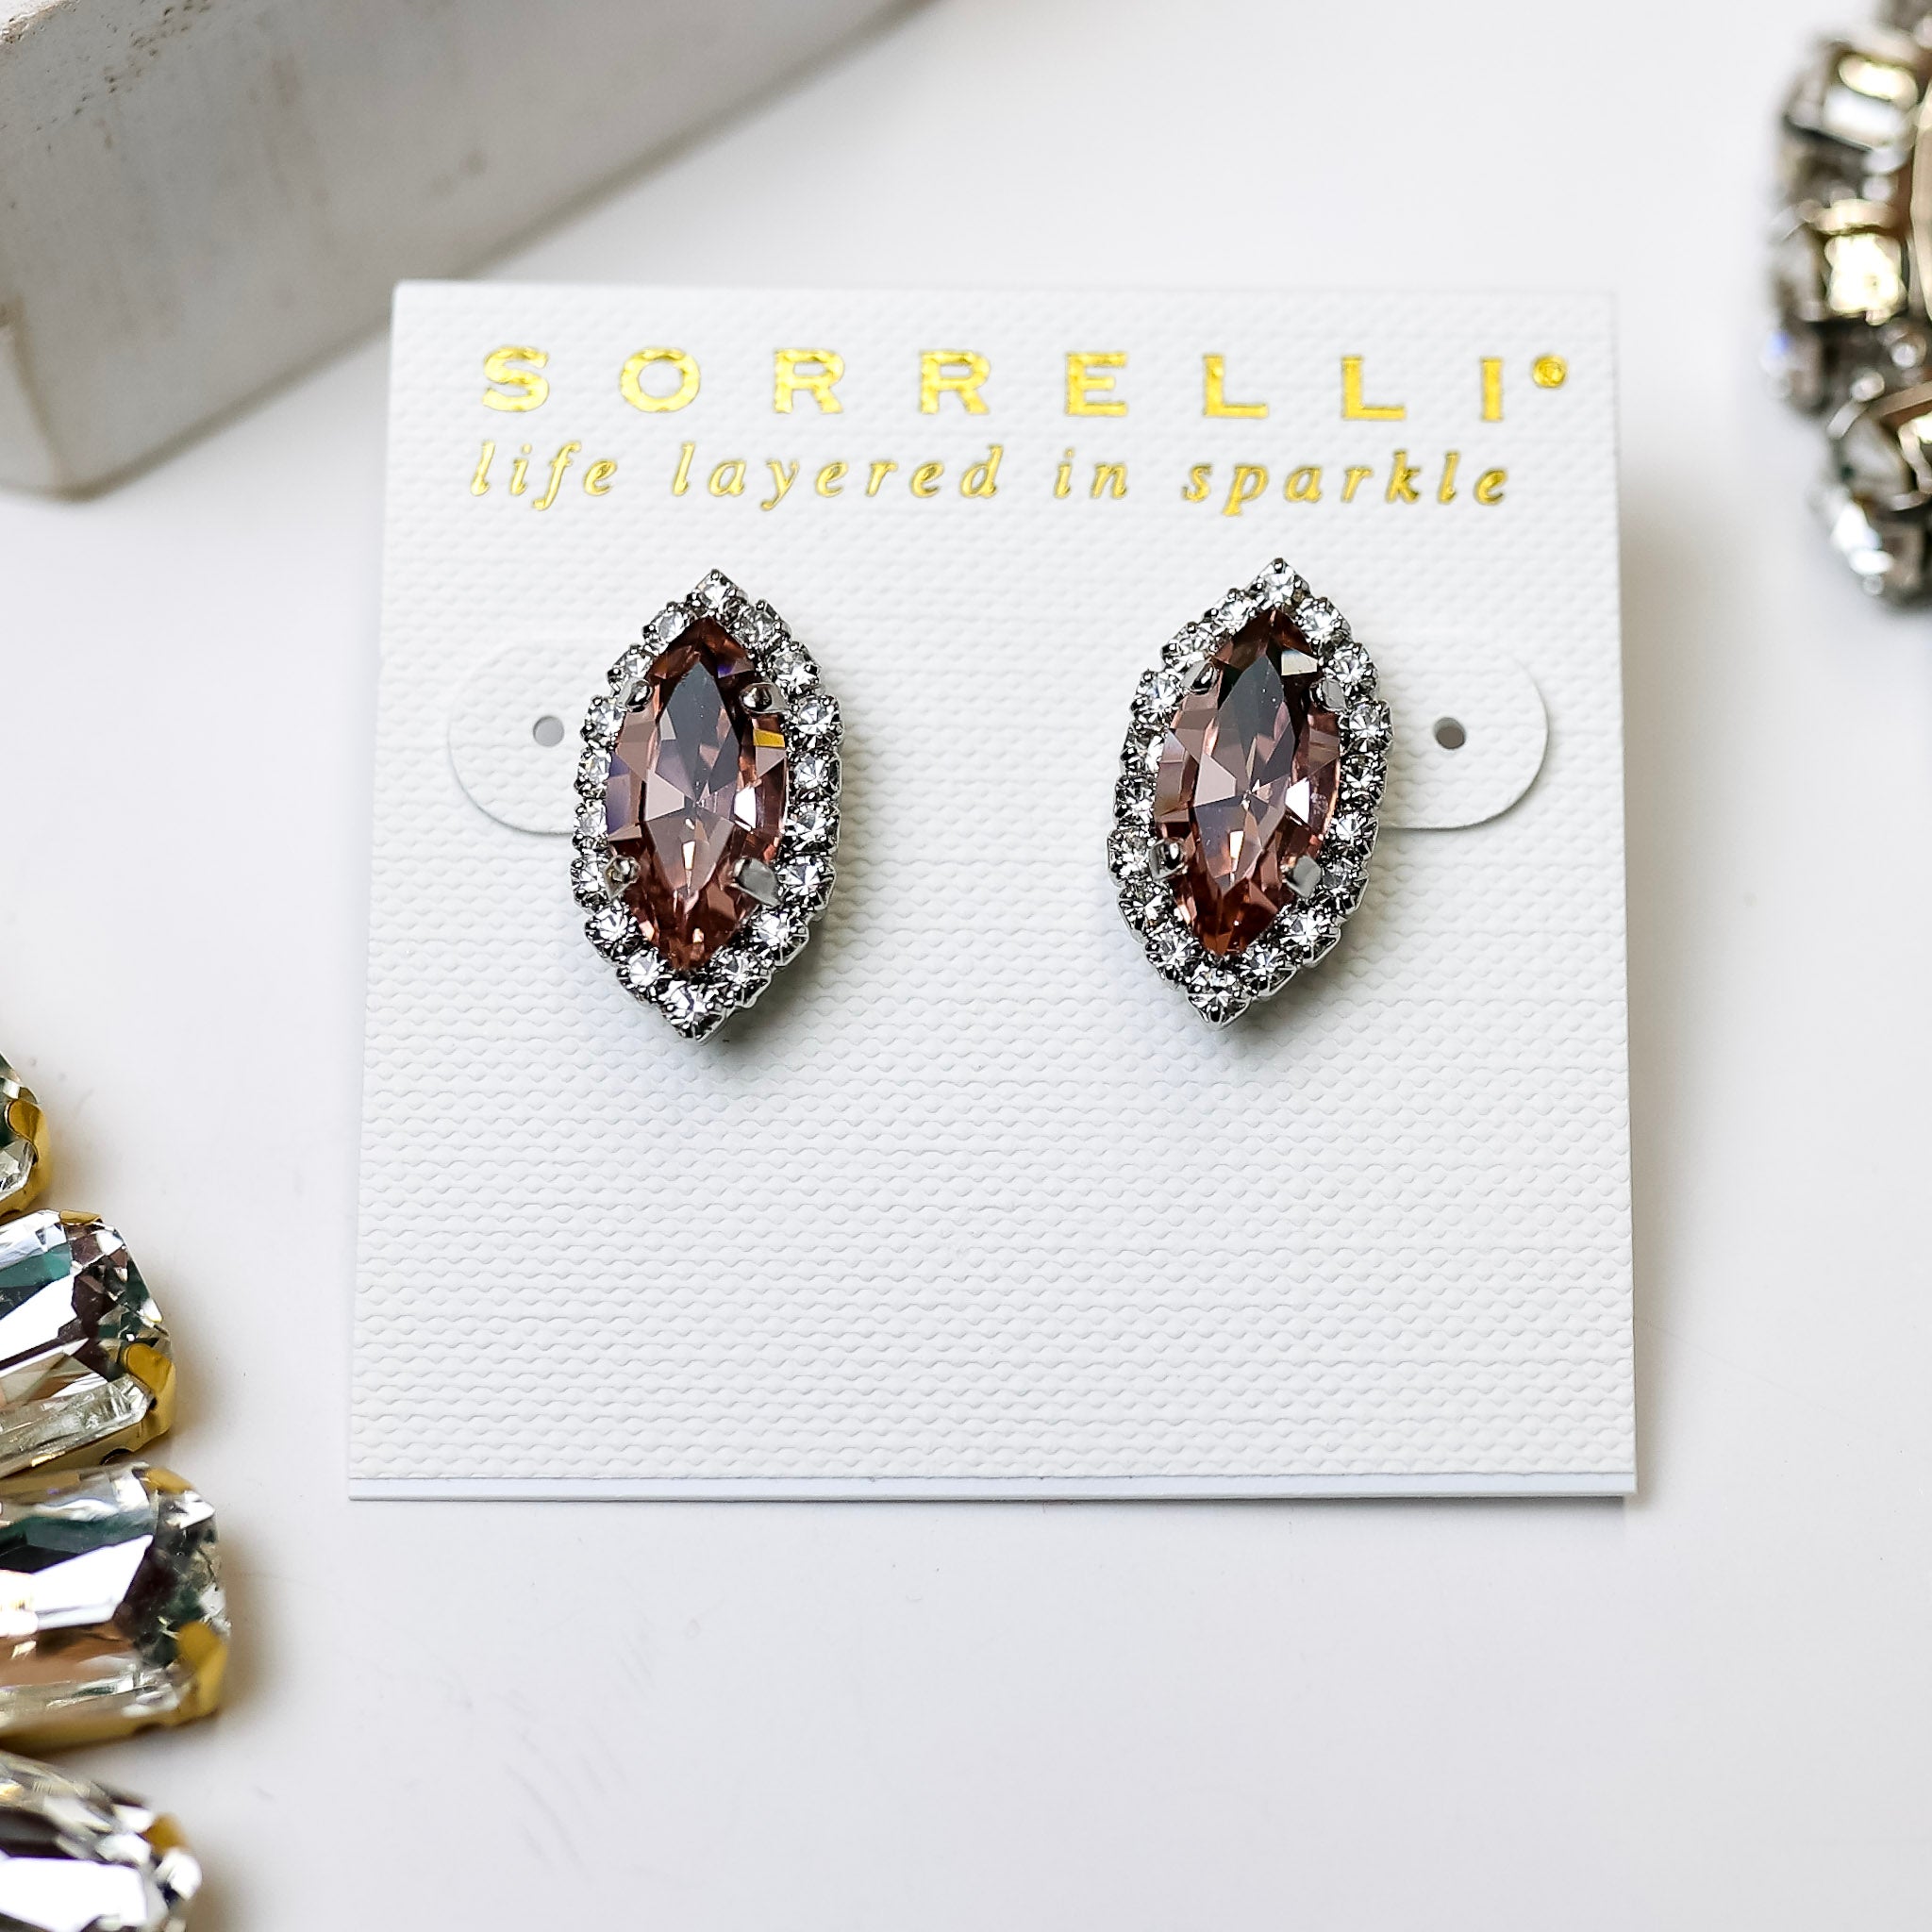 A pair of cat-eye shape crystal studs that are a dark rose color. The earrings have a clear crystal outline.